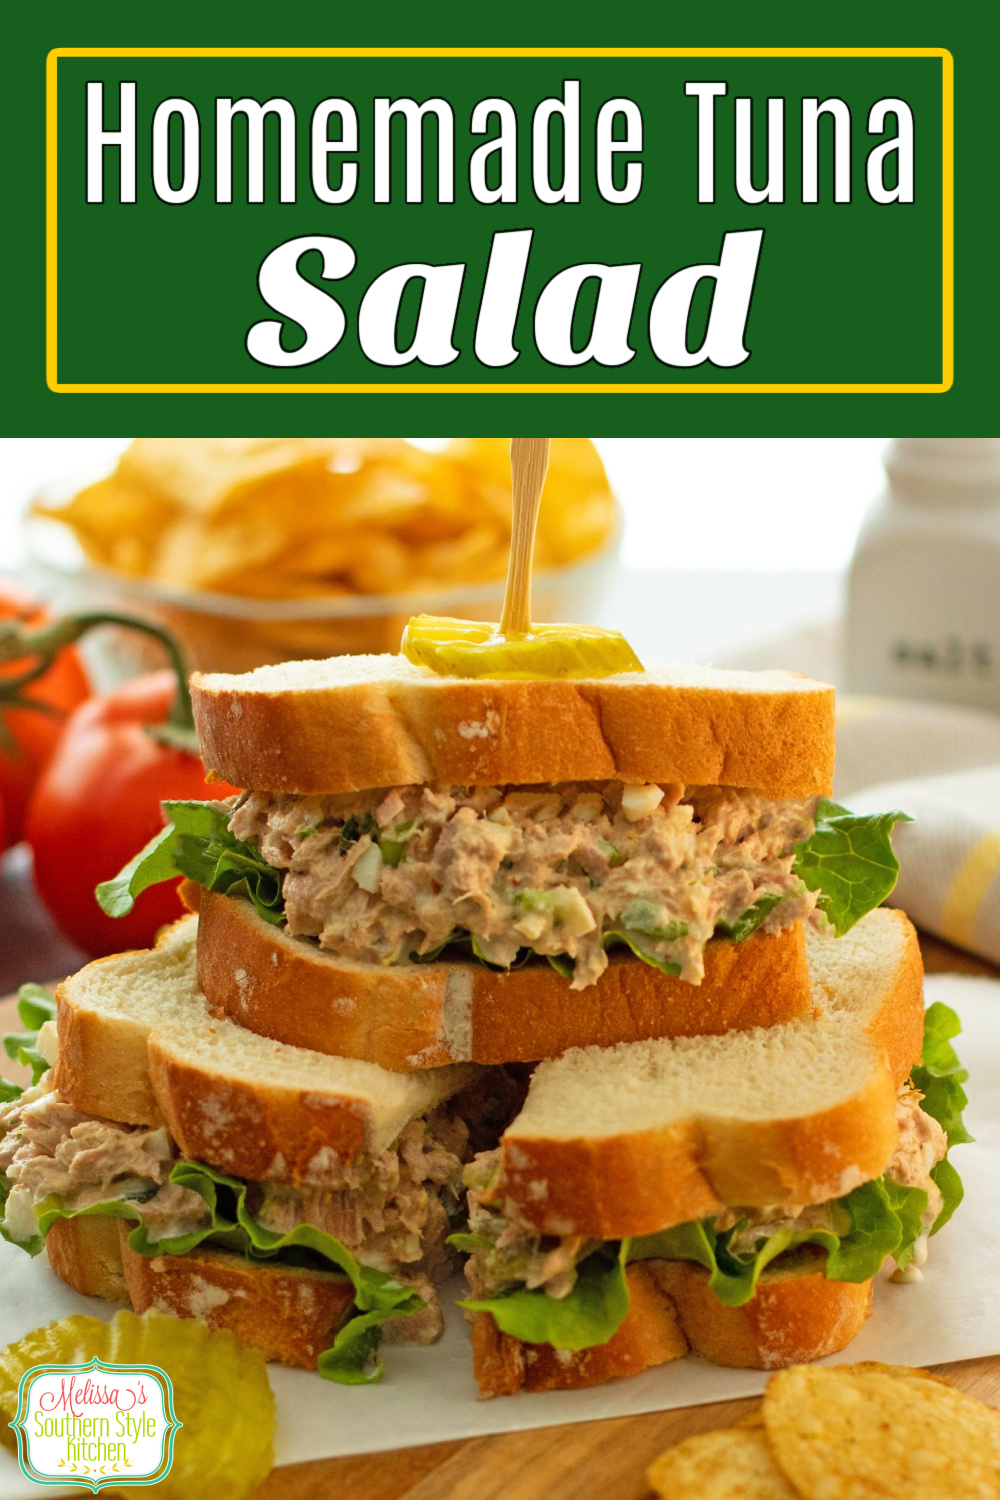 This easy Tuna Salad Recipe can be served on fresh bread, stuffed into buttery croissants, on a bed of lettuce or with crackers. #tunasalad #tunarecipes #cannedtuna #albacoretuna #easyrecipes #saladrecipes #southernstyletuna #eggsalad via @melissasssk